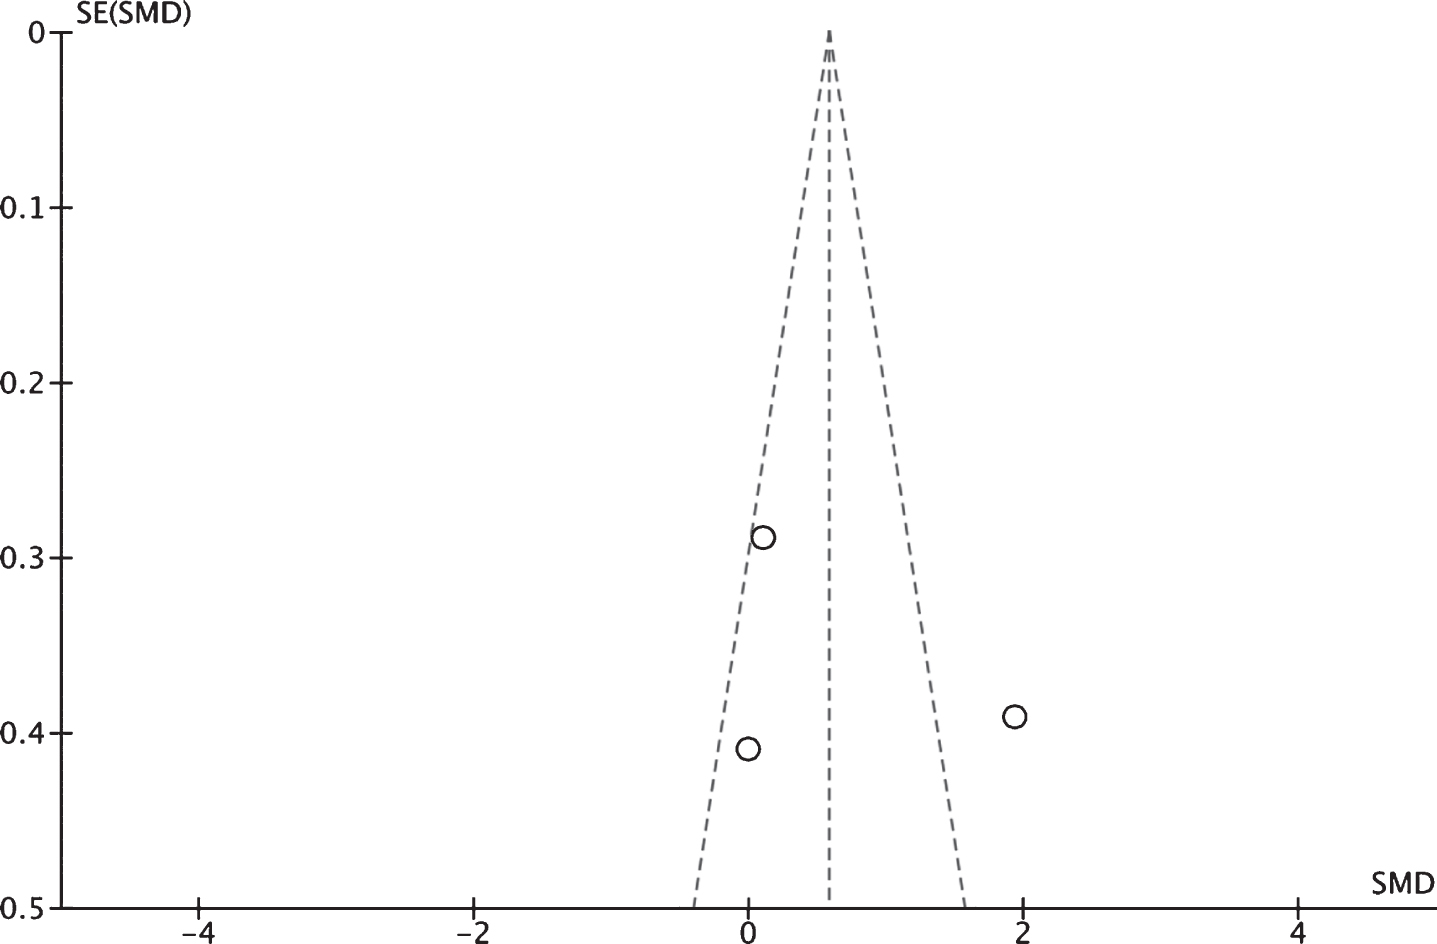 To visually assess for publication bias, a funnel plot of the three studies included in the quantatitve analysis has been prepared. Since the plot is balanced (Kendell’s Tau = 0.3333, p = 1.0000), it appears that the risk of publication bias in this case is small. The Fail-Safe N was calculated to be 8 using the Rosenthal approach.